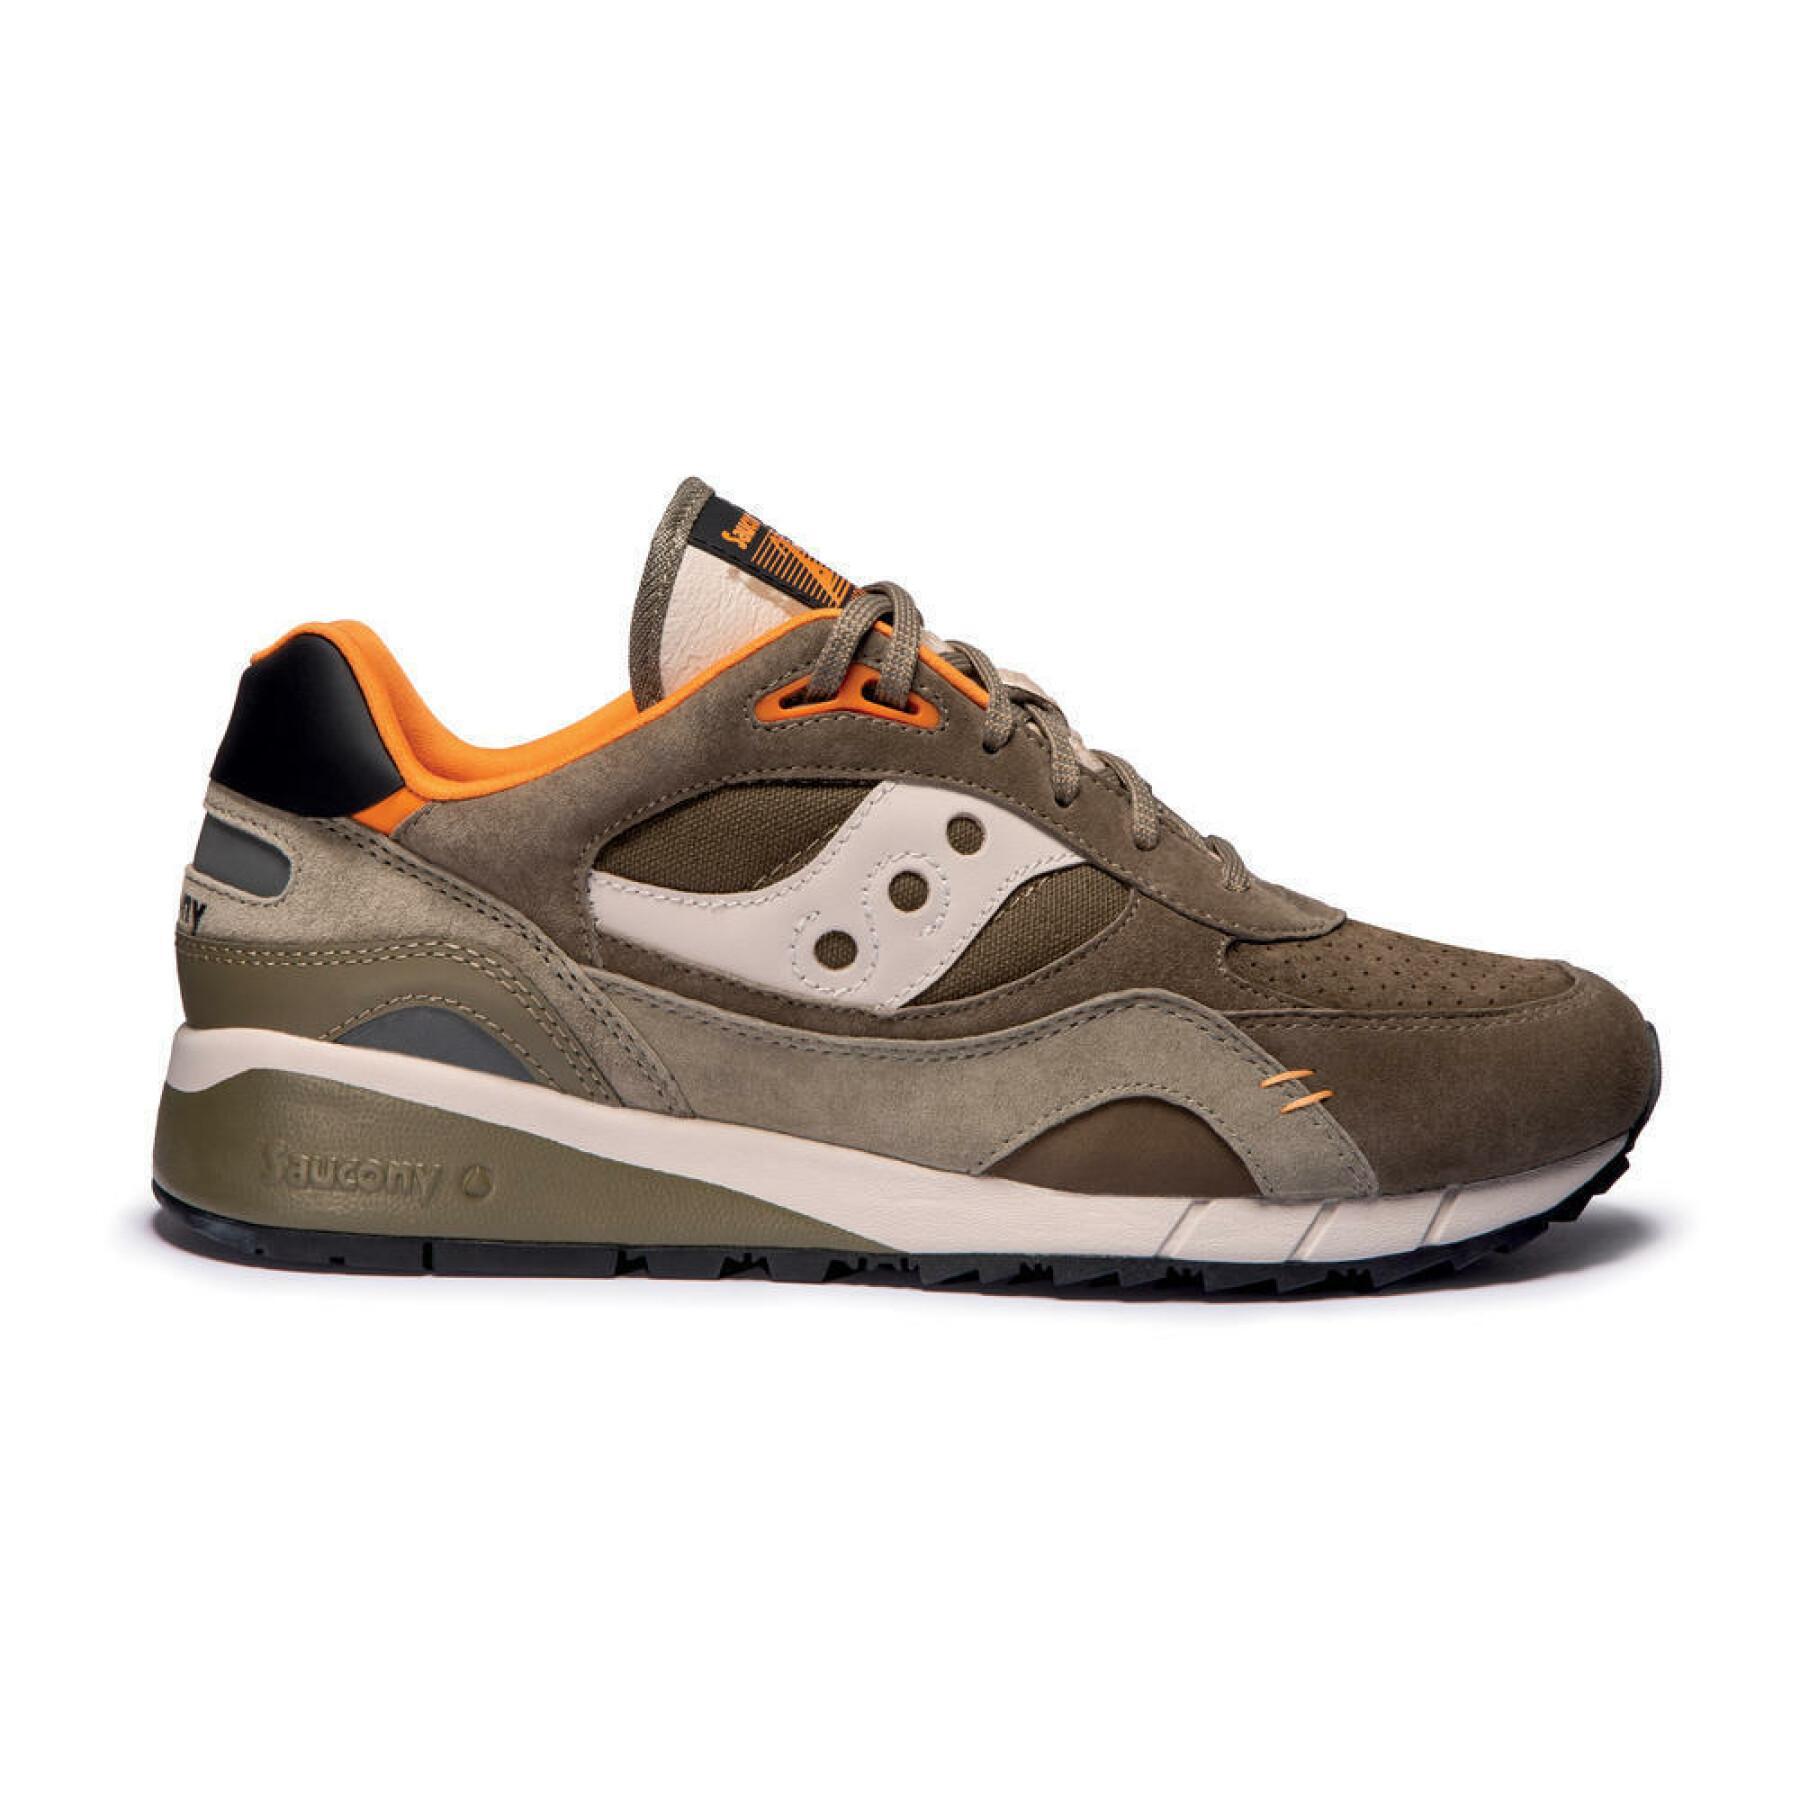 Saucony shadow 6000 shoes